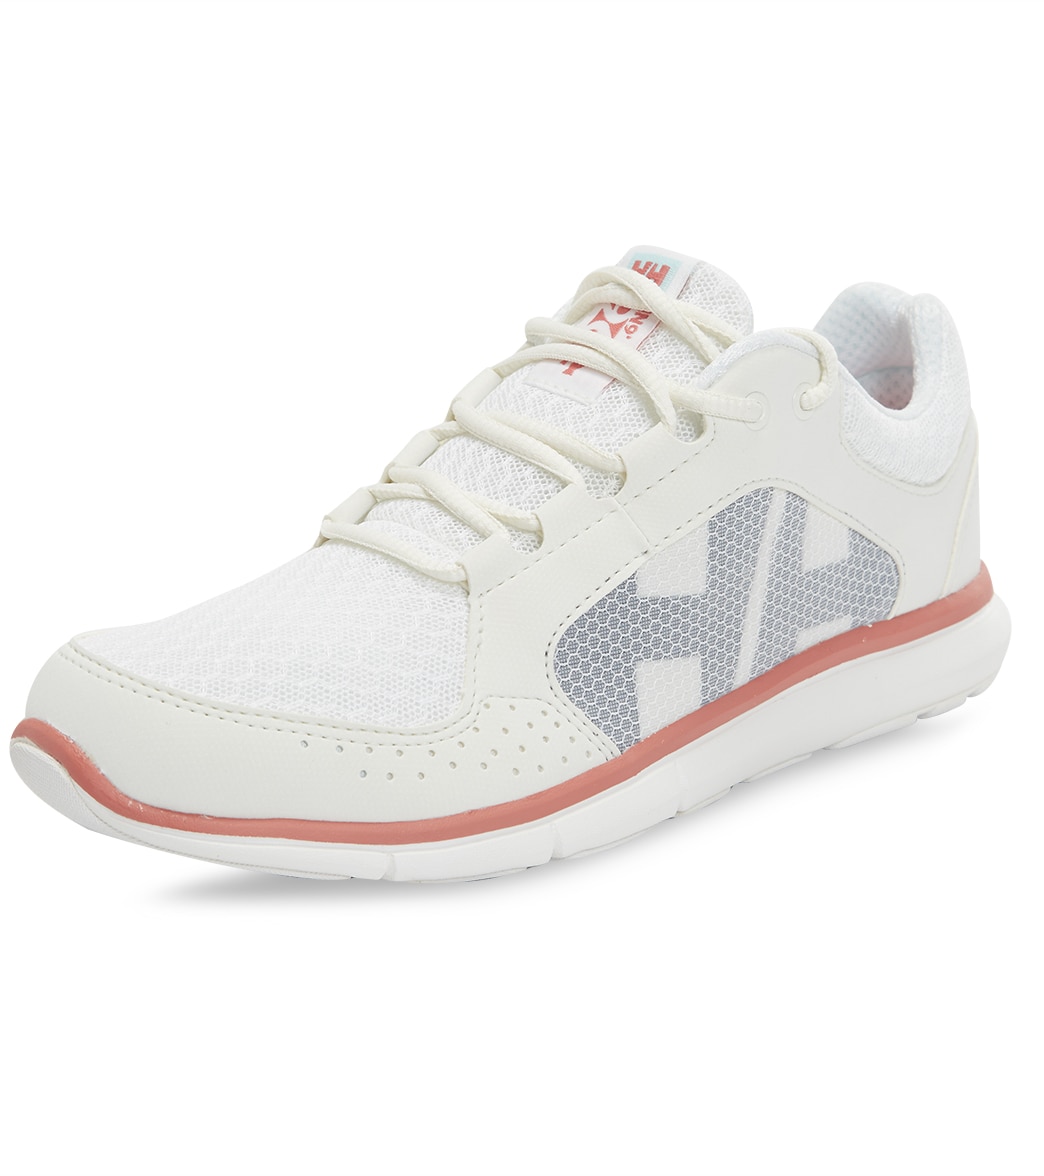 Helly Hansen Women's Ahiga V4 Hydropower Water Shoe - Off White/Shell Pink 6 - Swimoutlet.com